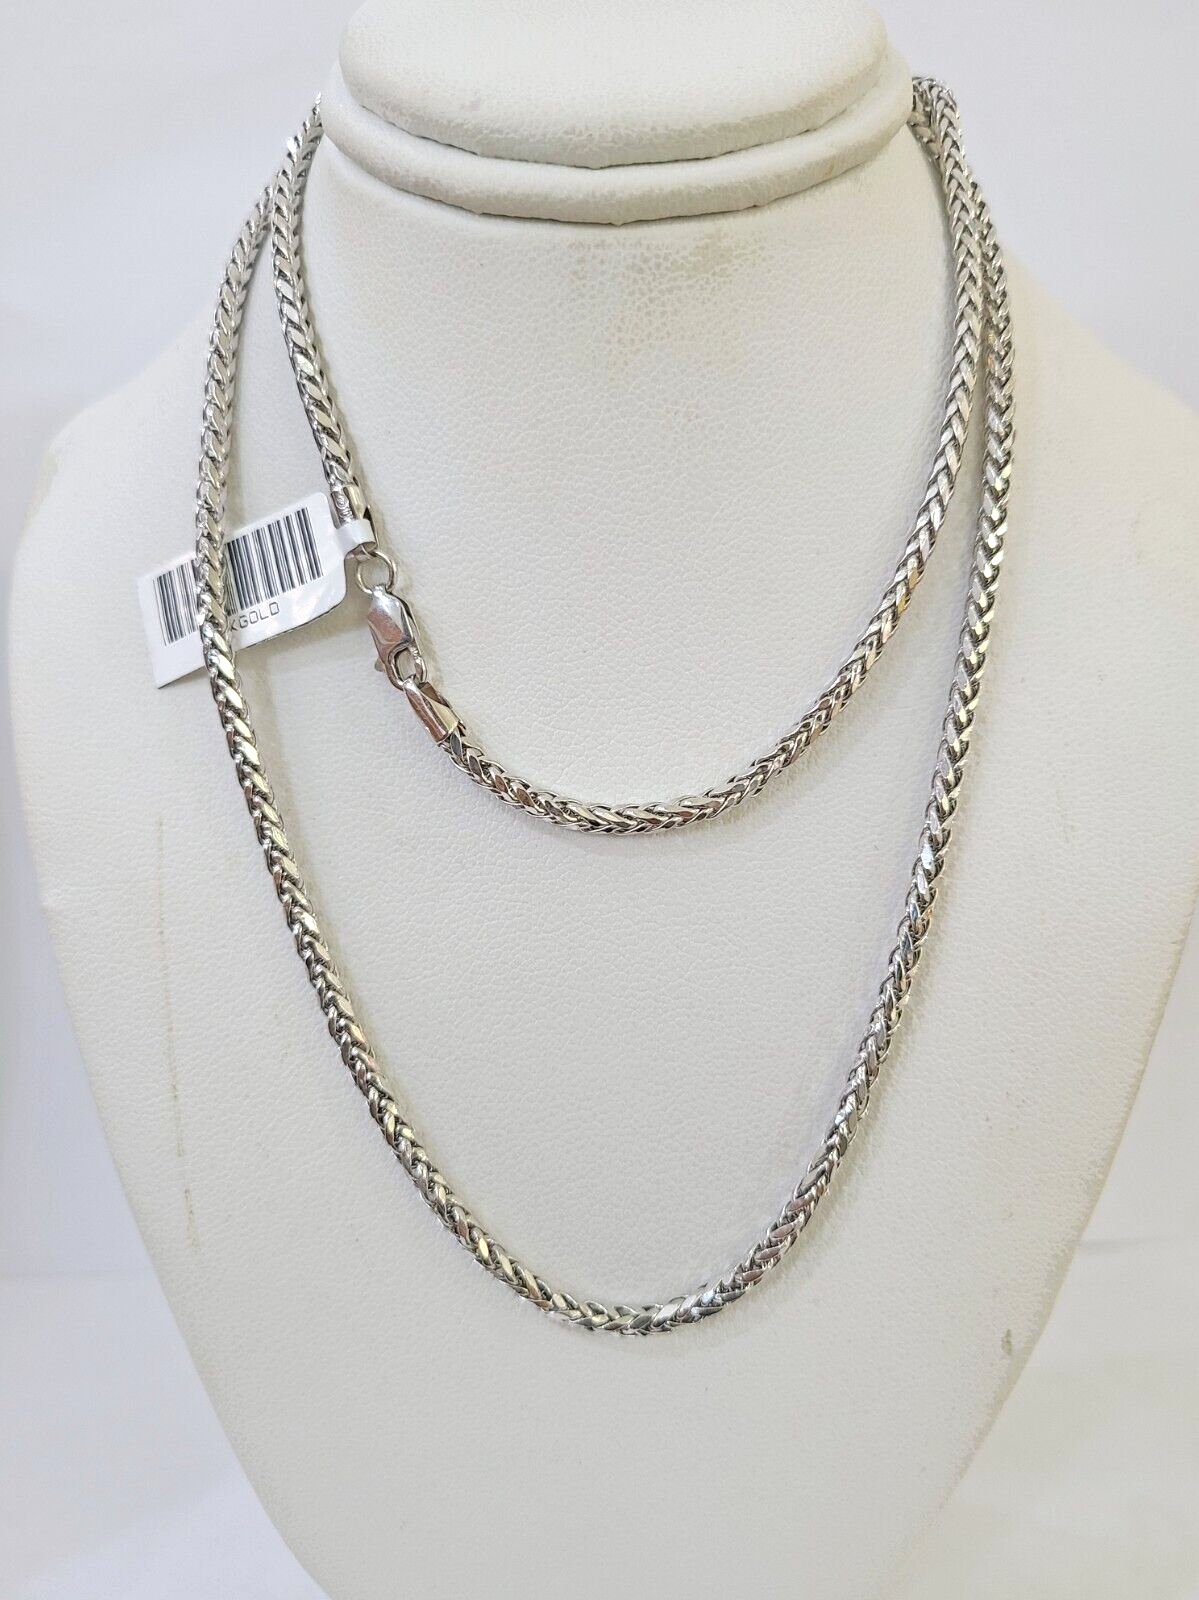 Real 10k Palm Chain White Gold 4mm 24" Necklace Men Women Real Genuine